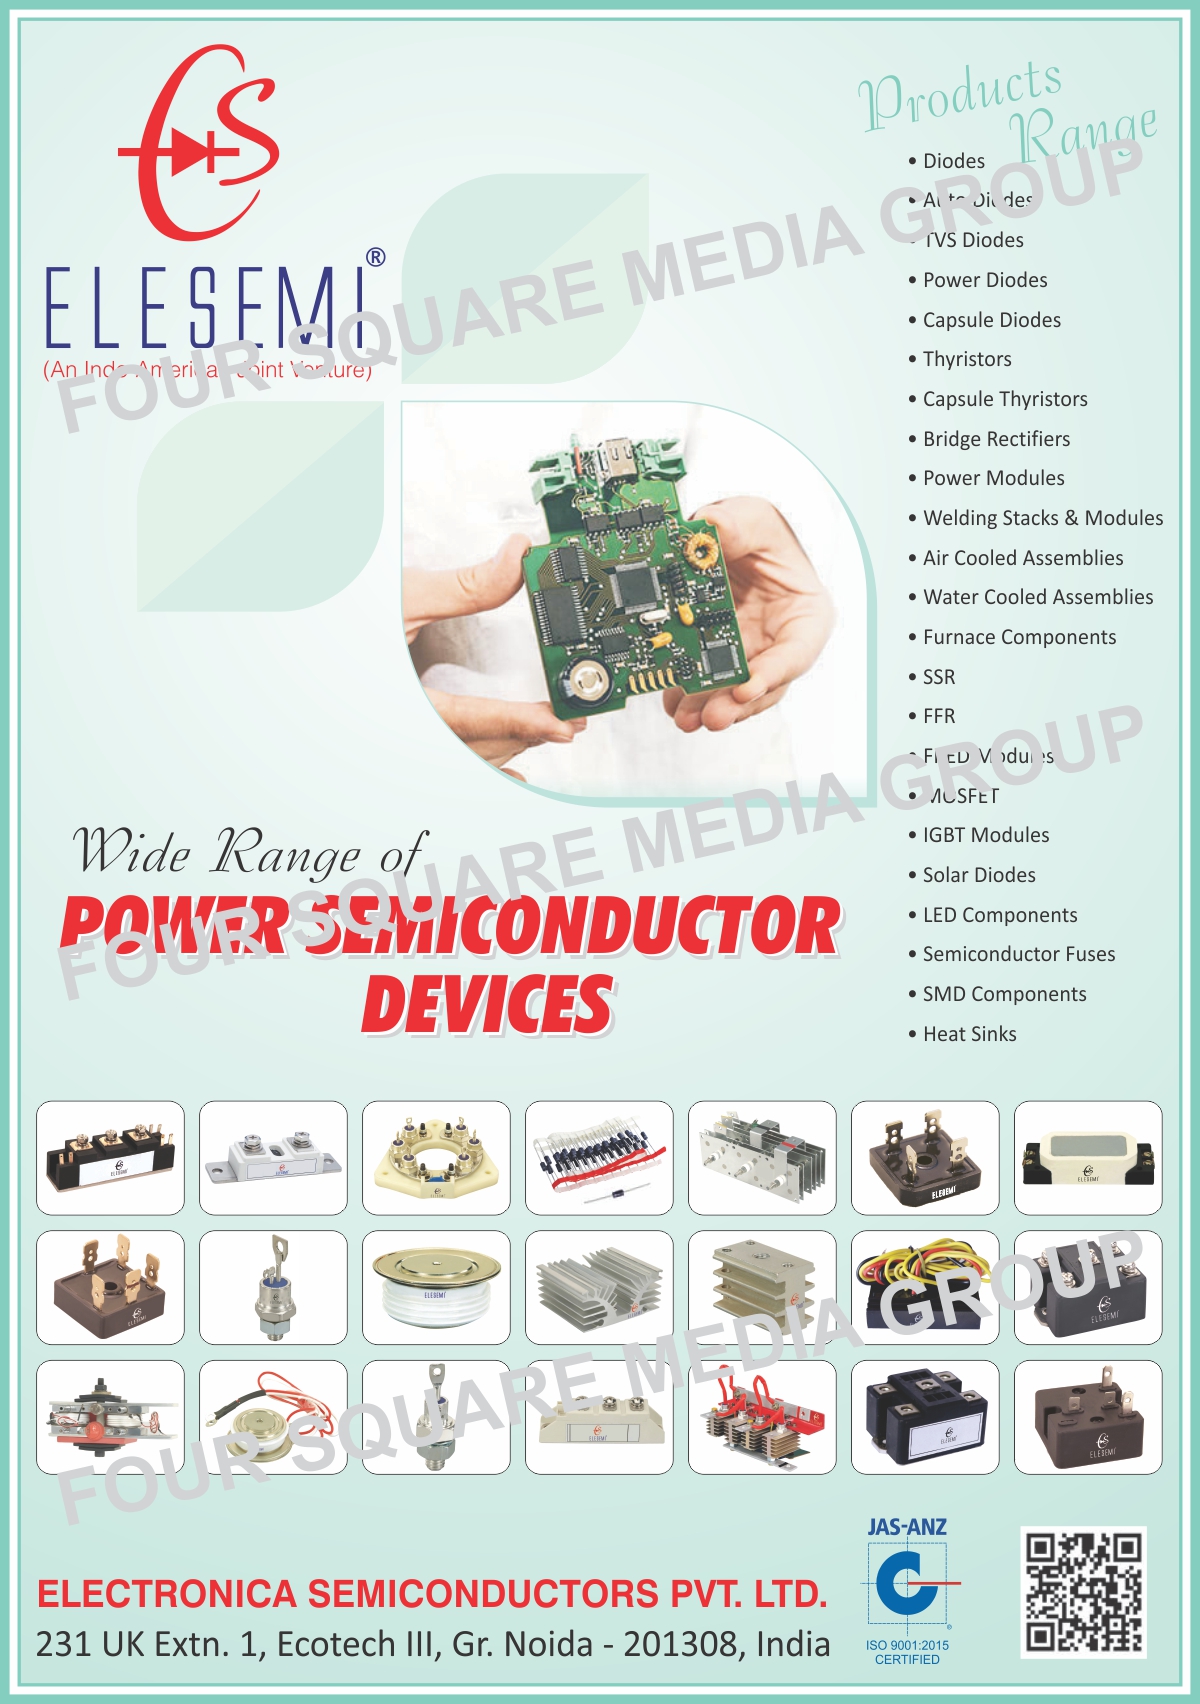 Power Semiconductor Devices, Diodes, Auto Diodes, TVS Diodes, Power Diodes, Capsule Diodes, Thyristors, Capsule Thyristors, Bridge Rectifiers, Power Modules, Welding Stacks, Welding Modules, Air Cooled Assemblies, Water Cooled Assemblies, Furnace Components, SSR, FFR, FRED Modules, Mosfets, IGBT Modules, Solar Diodes, Led Components, Semiconductor Fuses, SMD Components, Heat Sinks